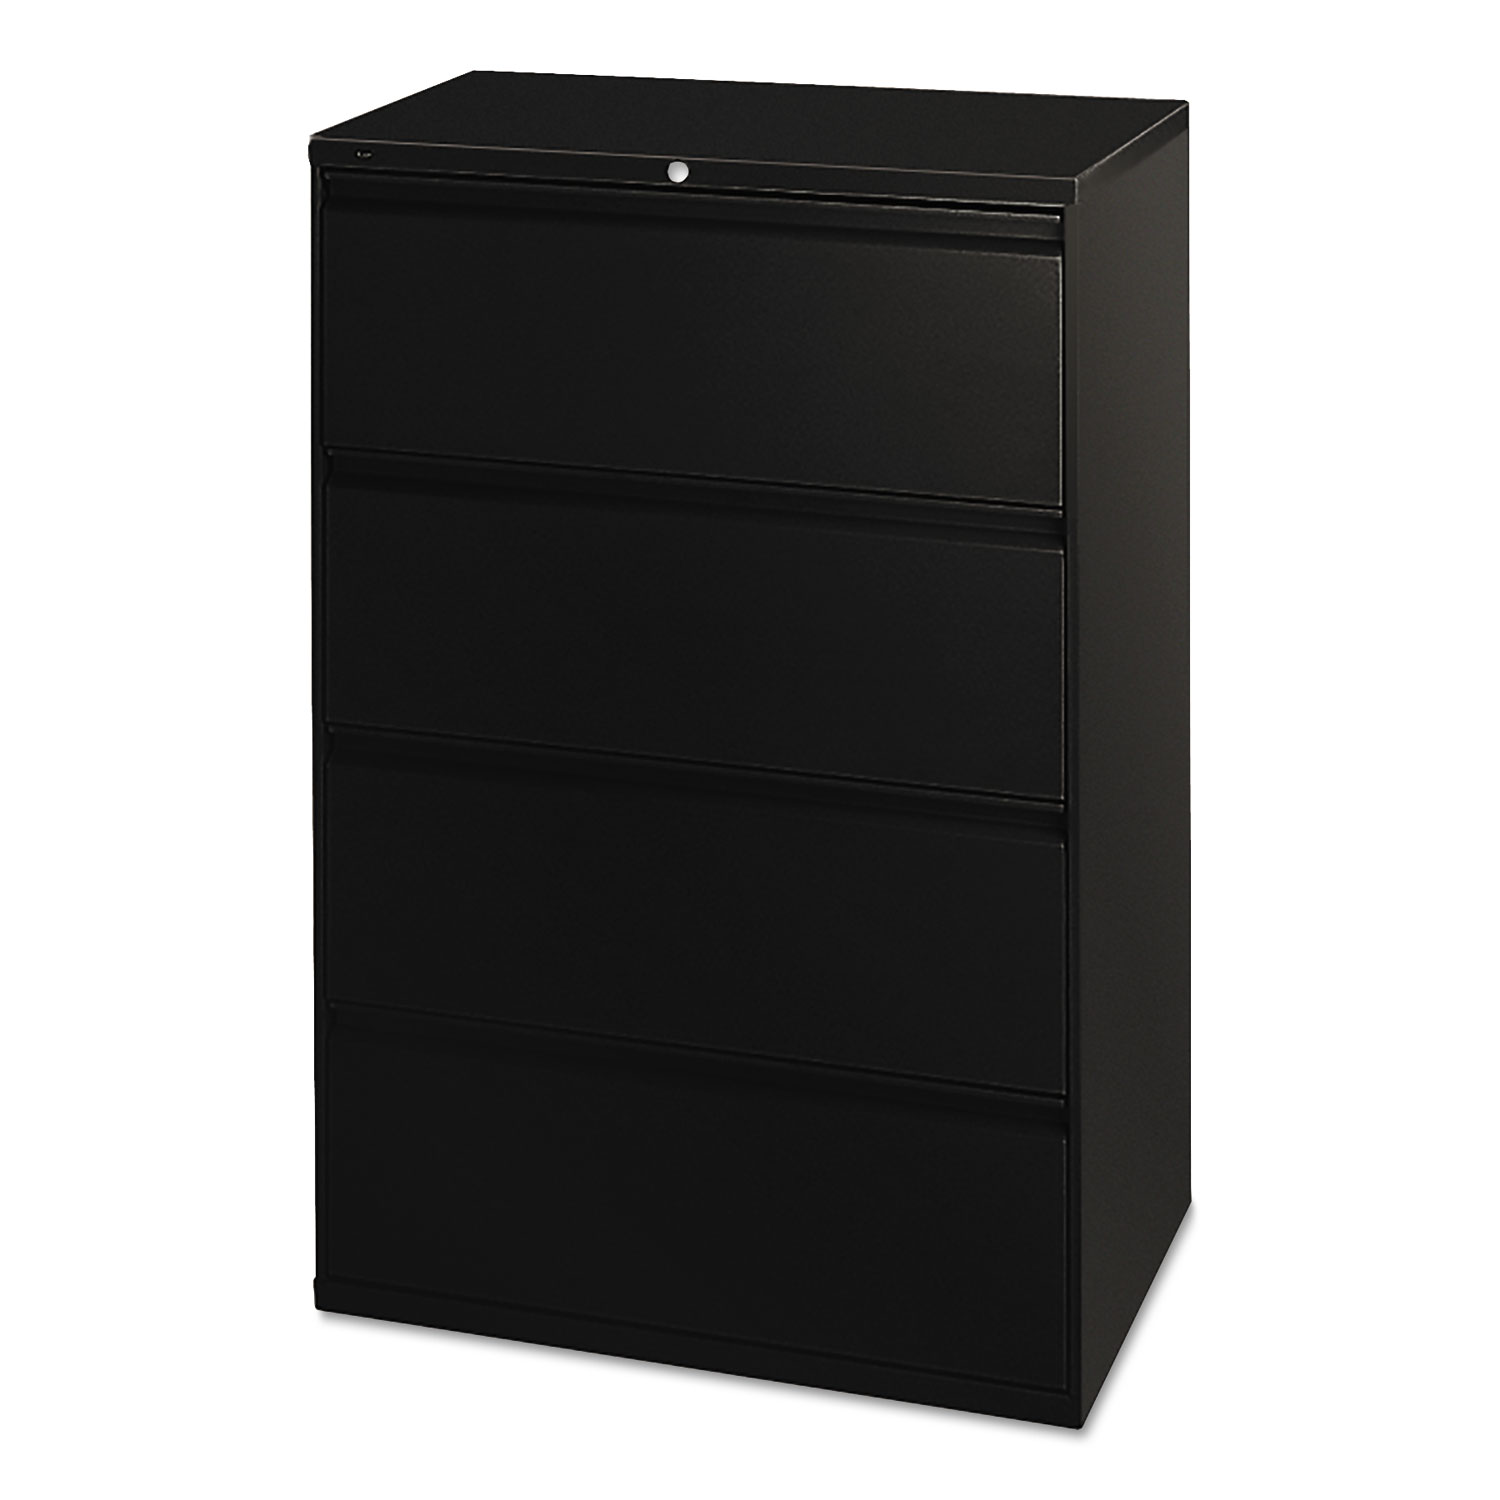 800 Series Four-Drawer Lateral File, 36w x 19-1/4d x 53-1/4h, Black